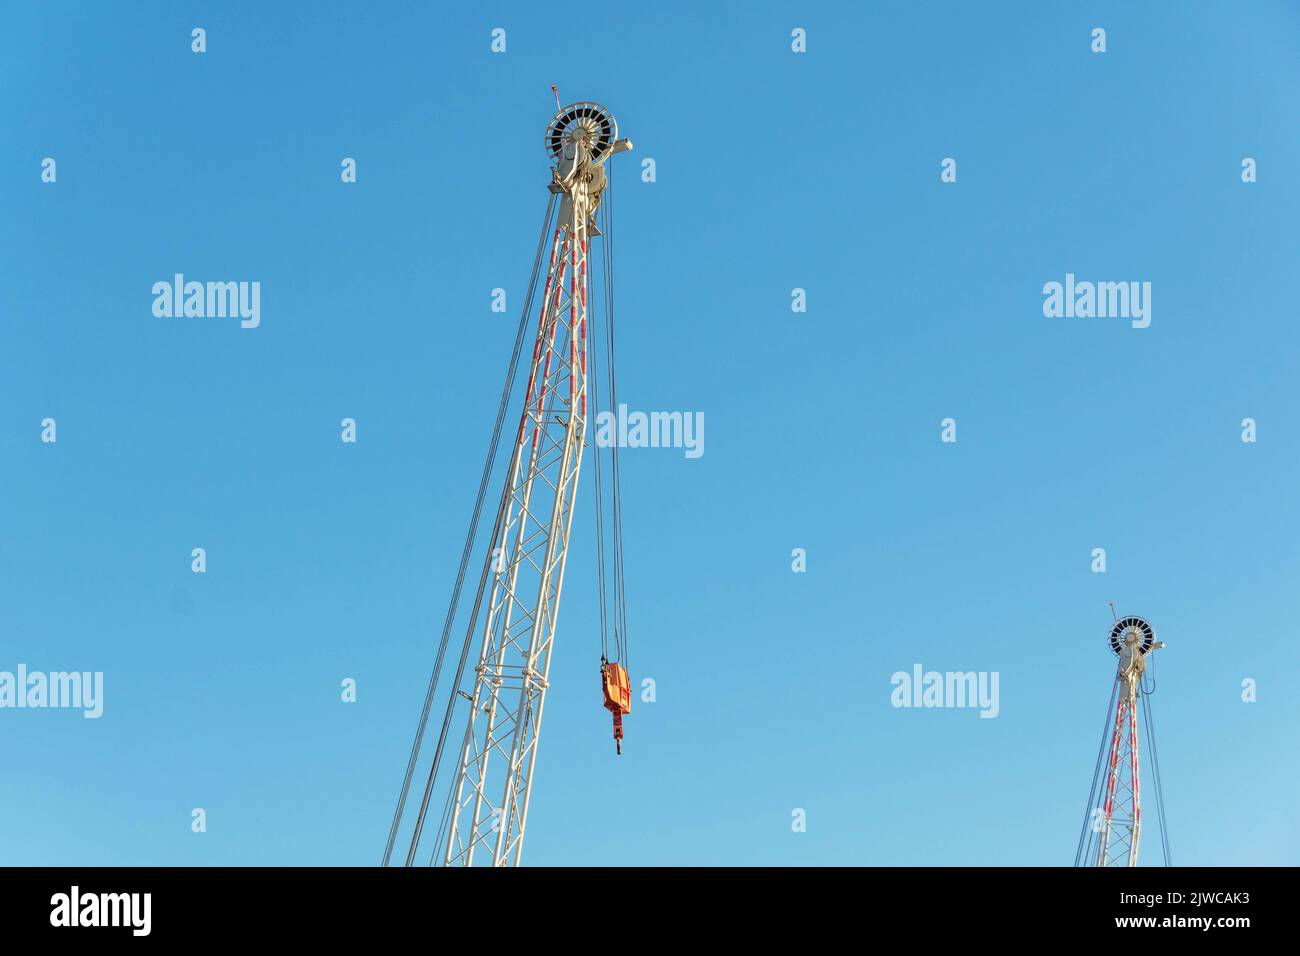 Steel wire rope on production platform, energy and petroleum industry Stock Photo